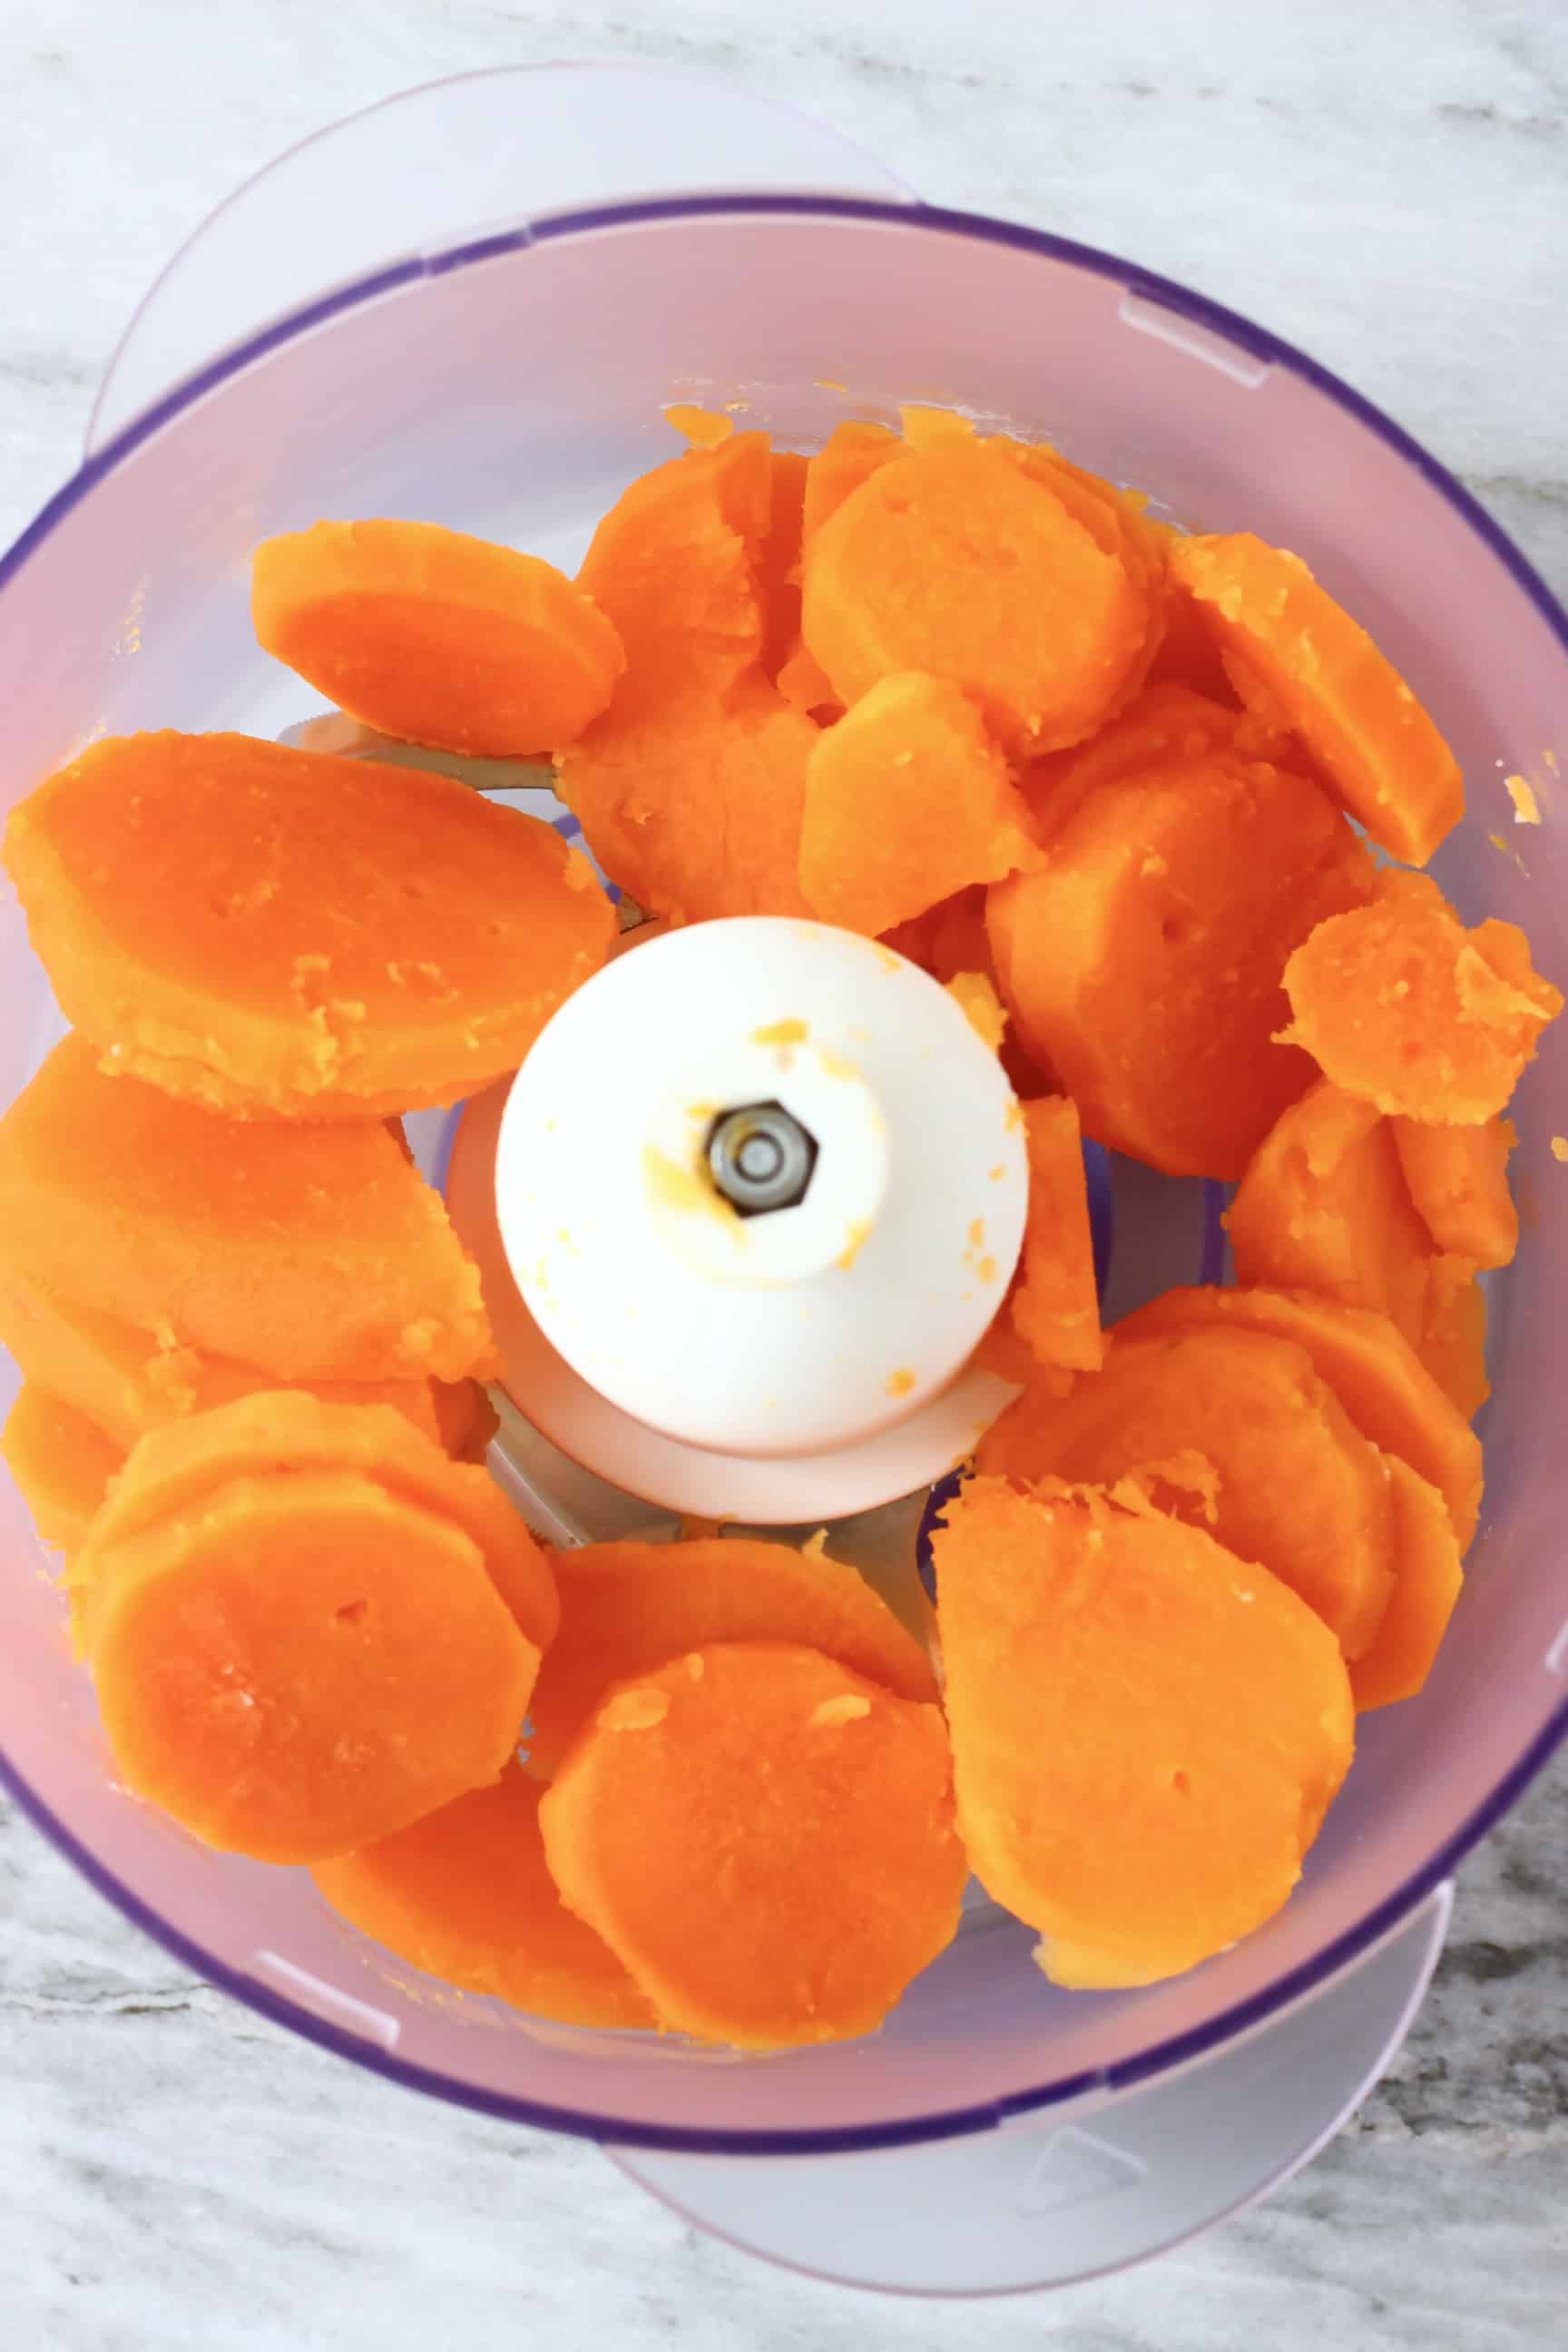 Sliced cooked sweet potatoes in a food processor